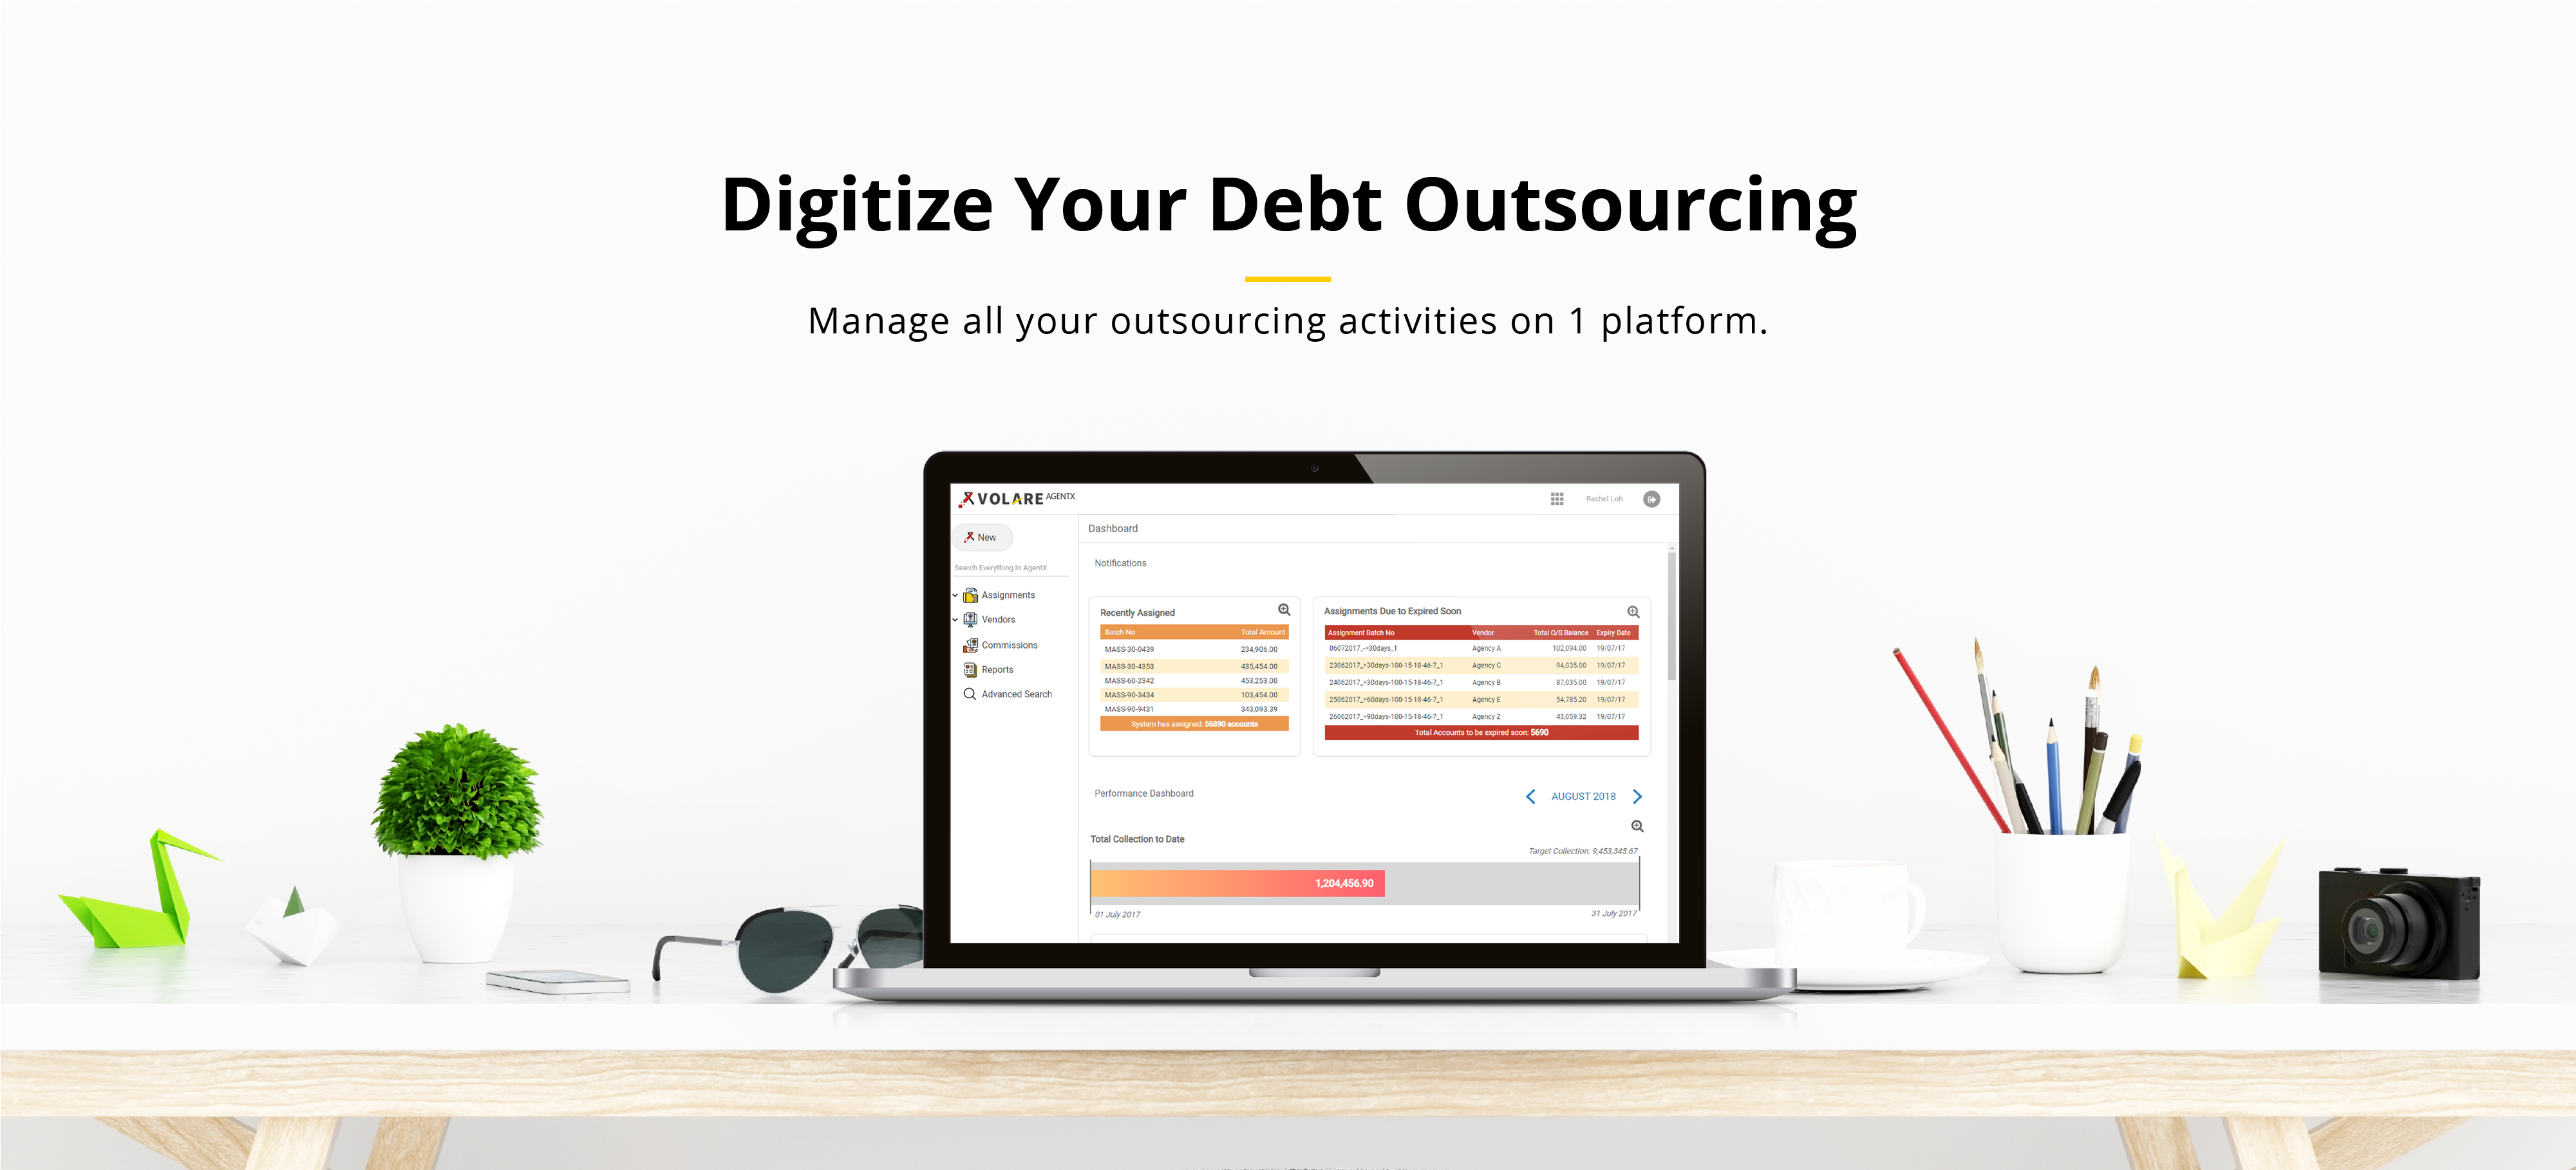 Digitize Your Debt Outsourcing